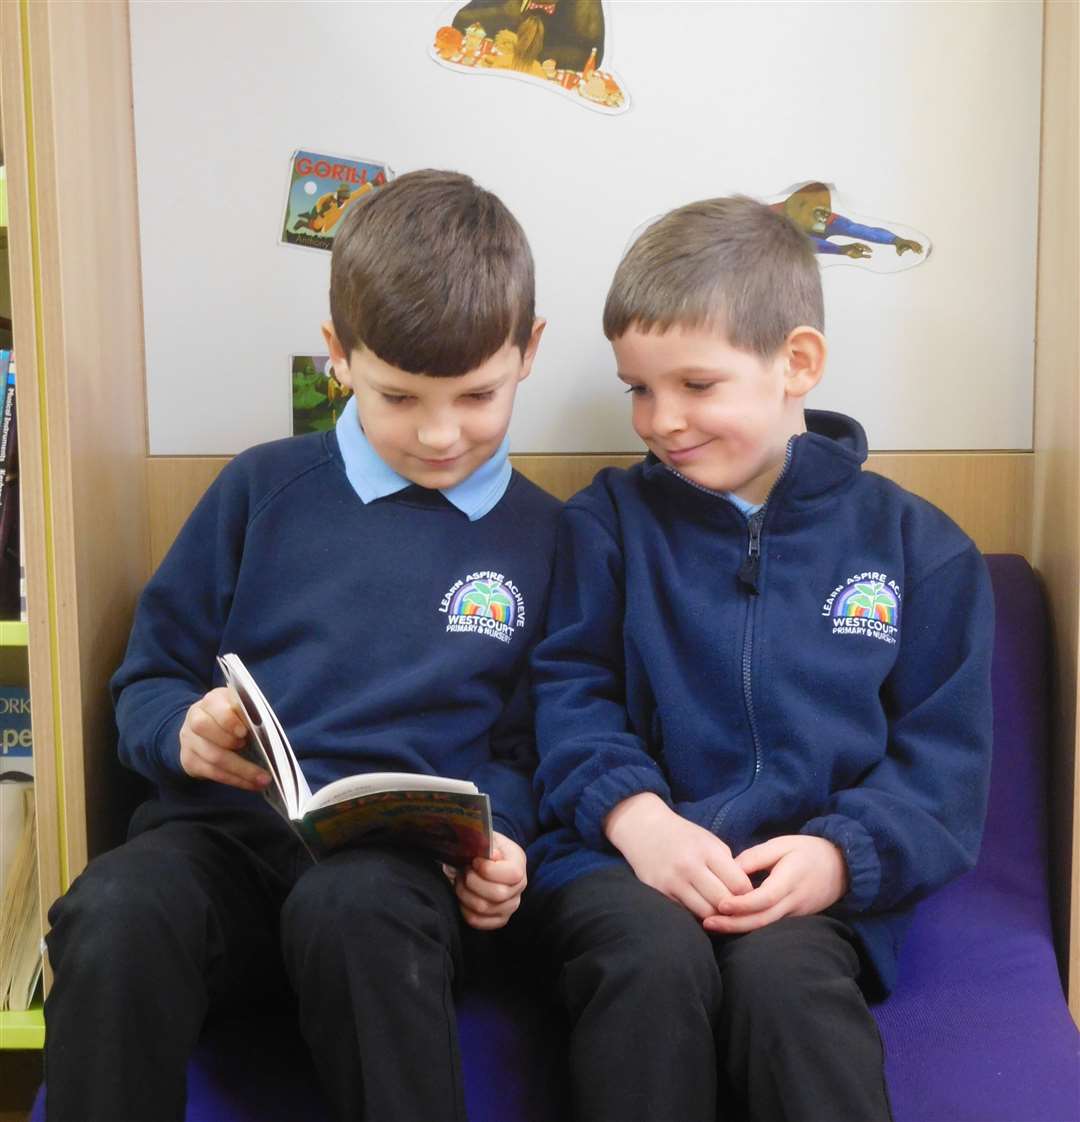 Westcourt Primary School in Gravesend has received praise for its approach to reading